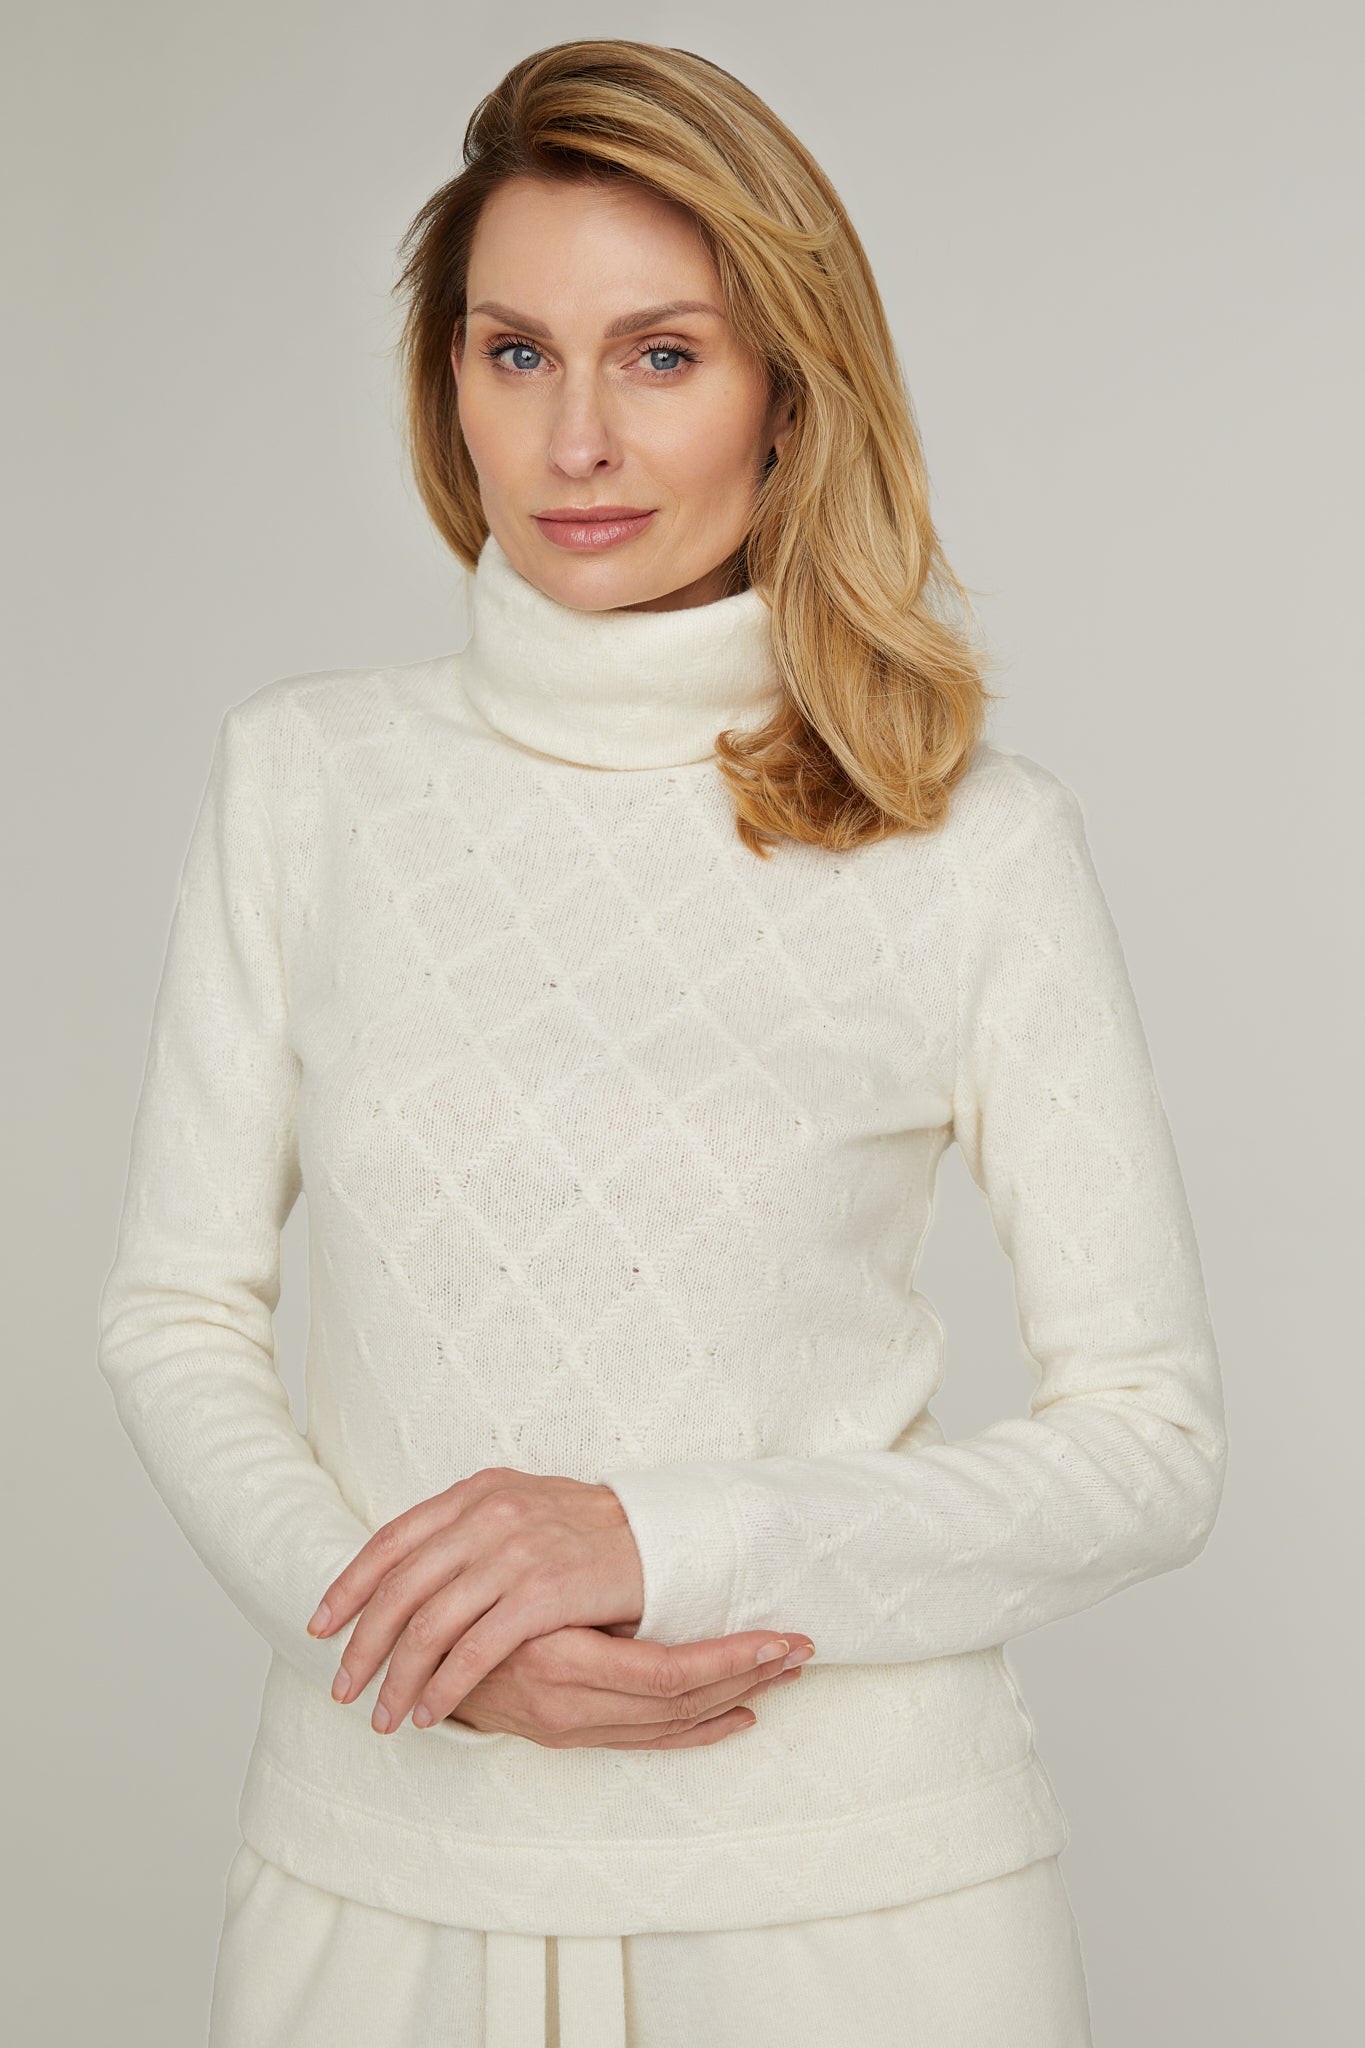 Gaudium Turtleneck Sweater With Pattern in Ivory White